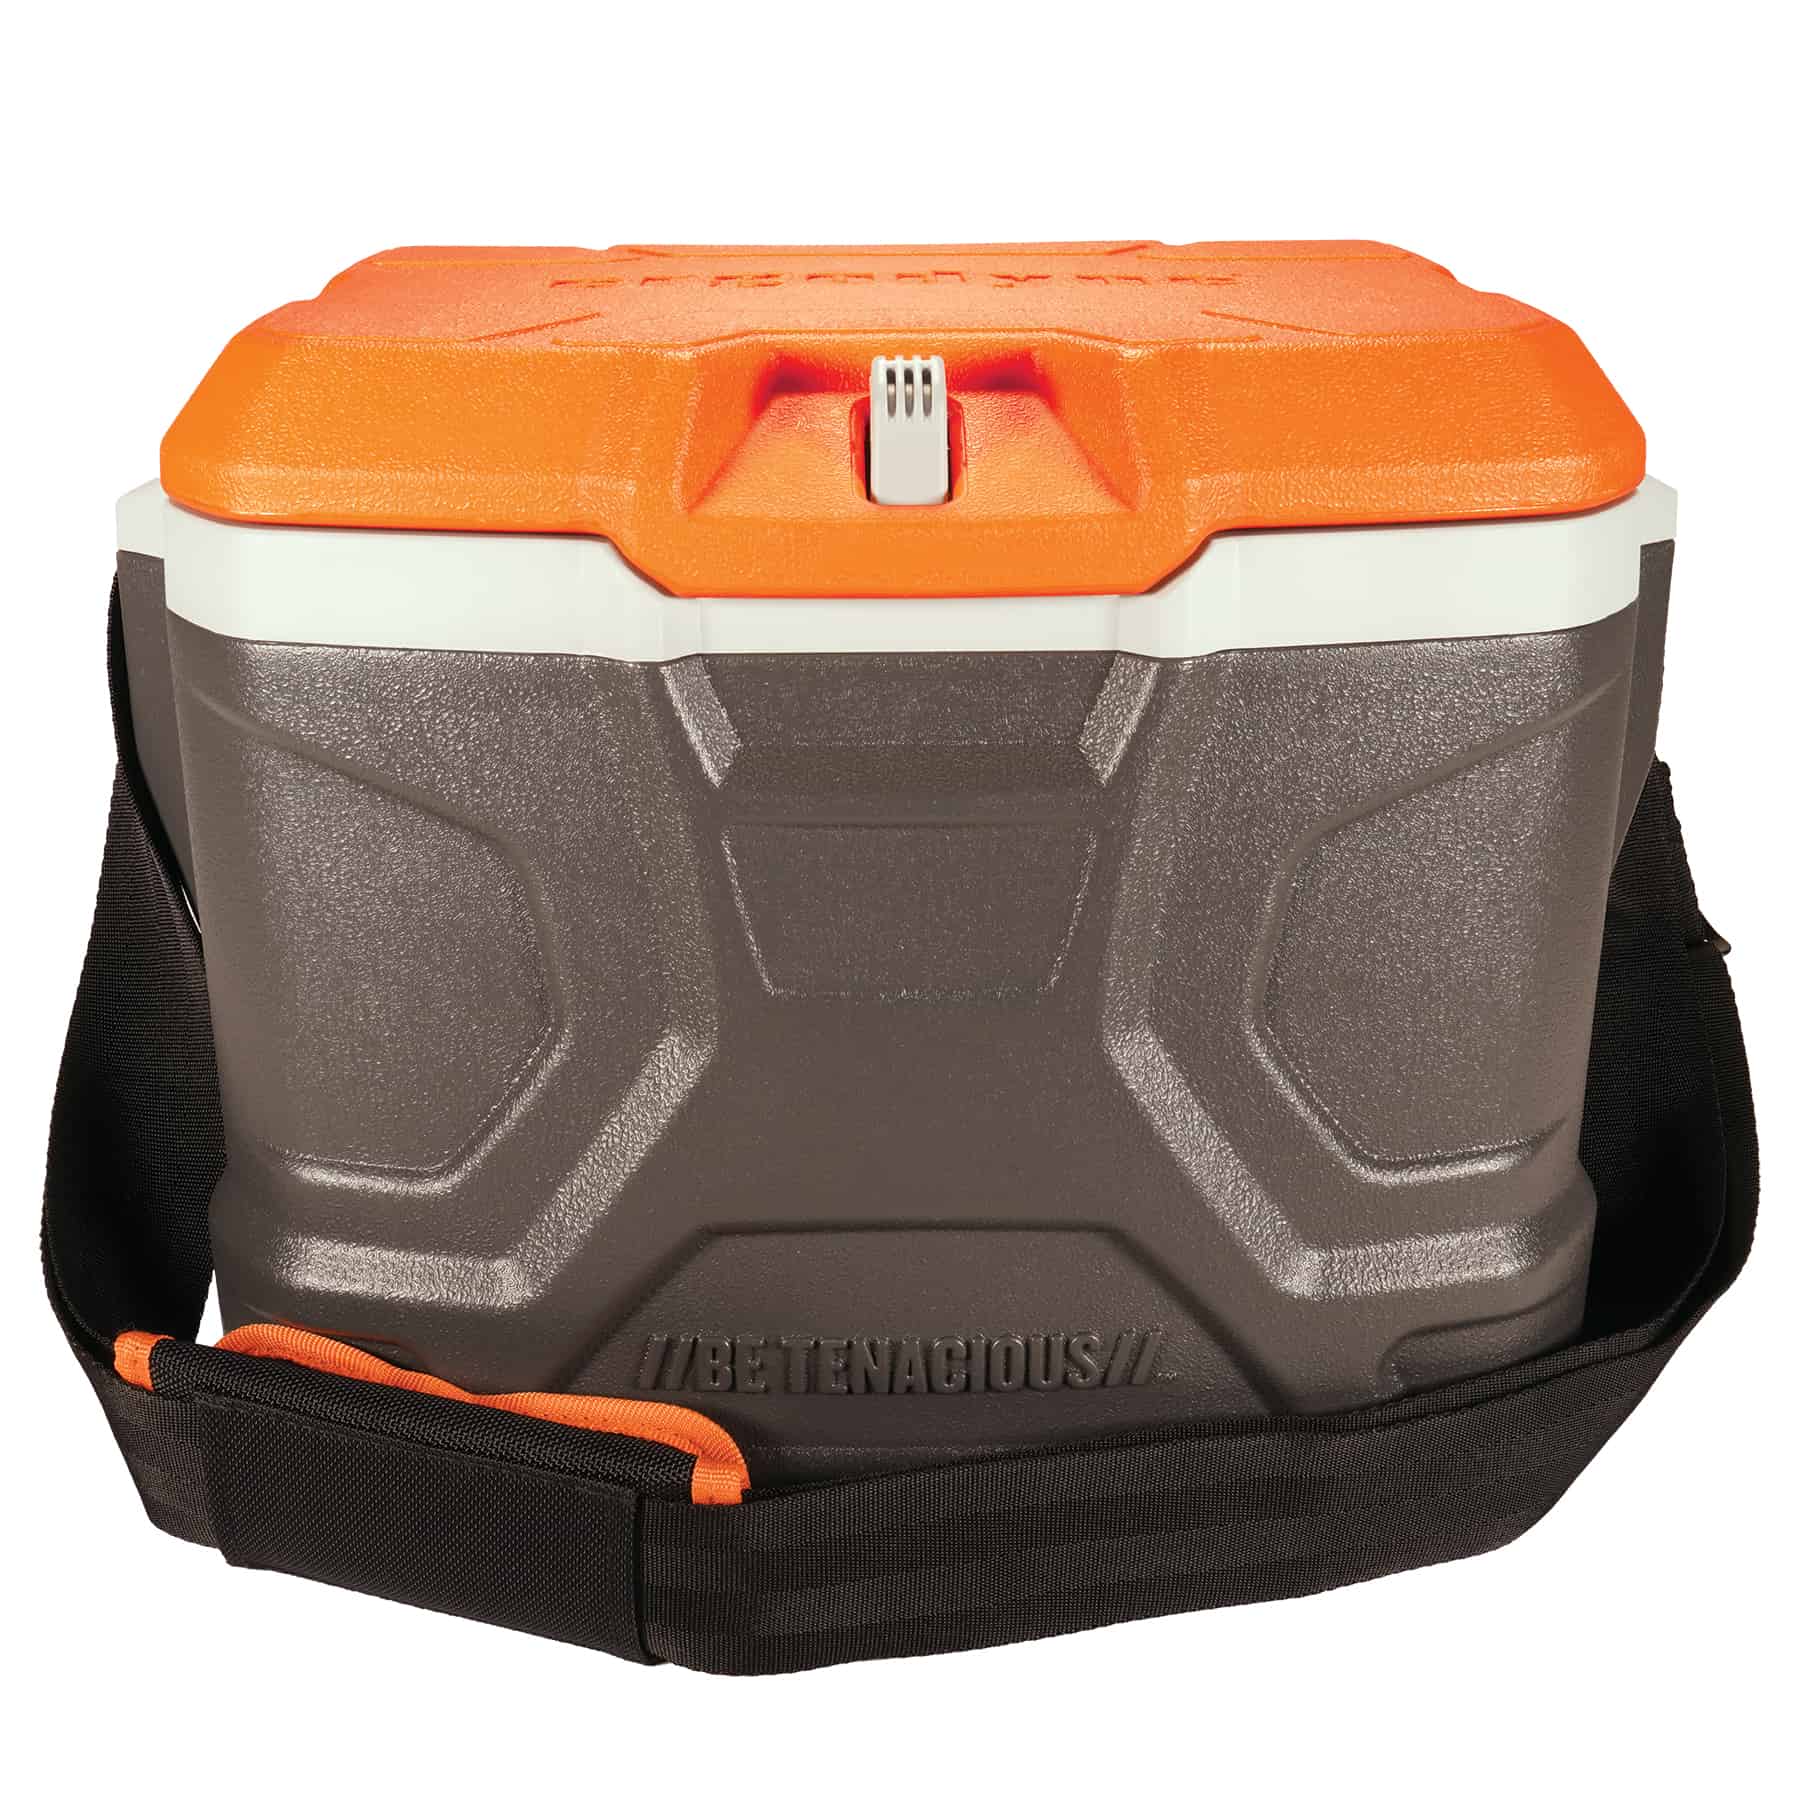 Ergodyne Chill-Its 5170 17-Quart Industrial Hard-Sided Cooler from Columbia Safety